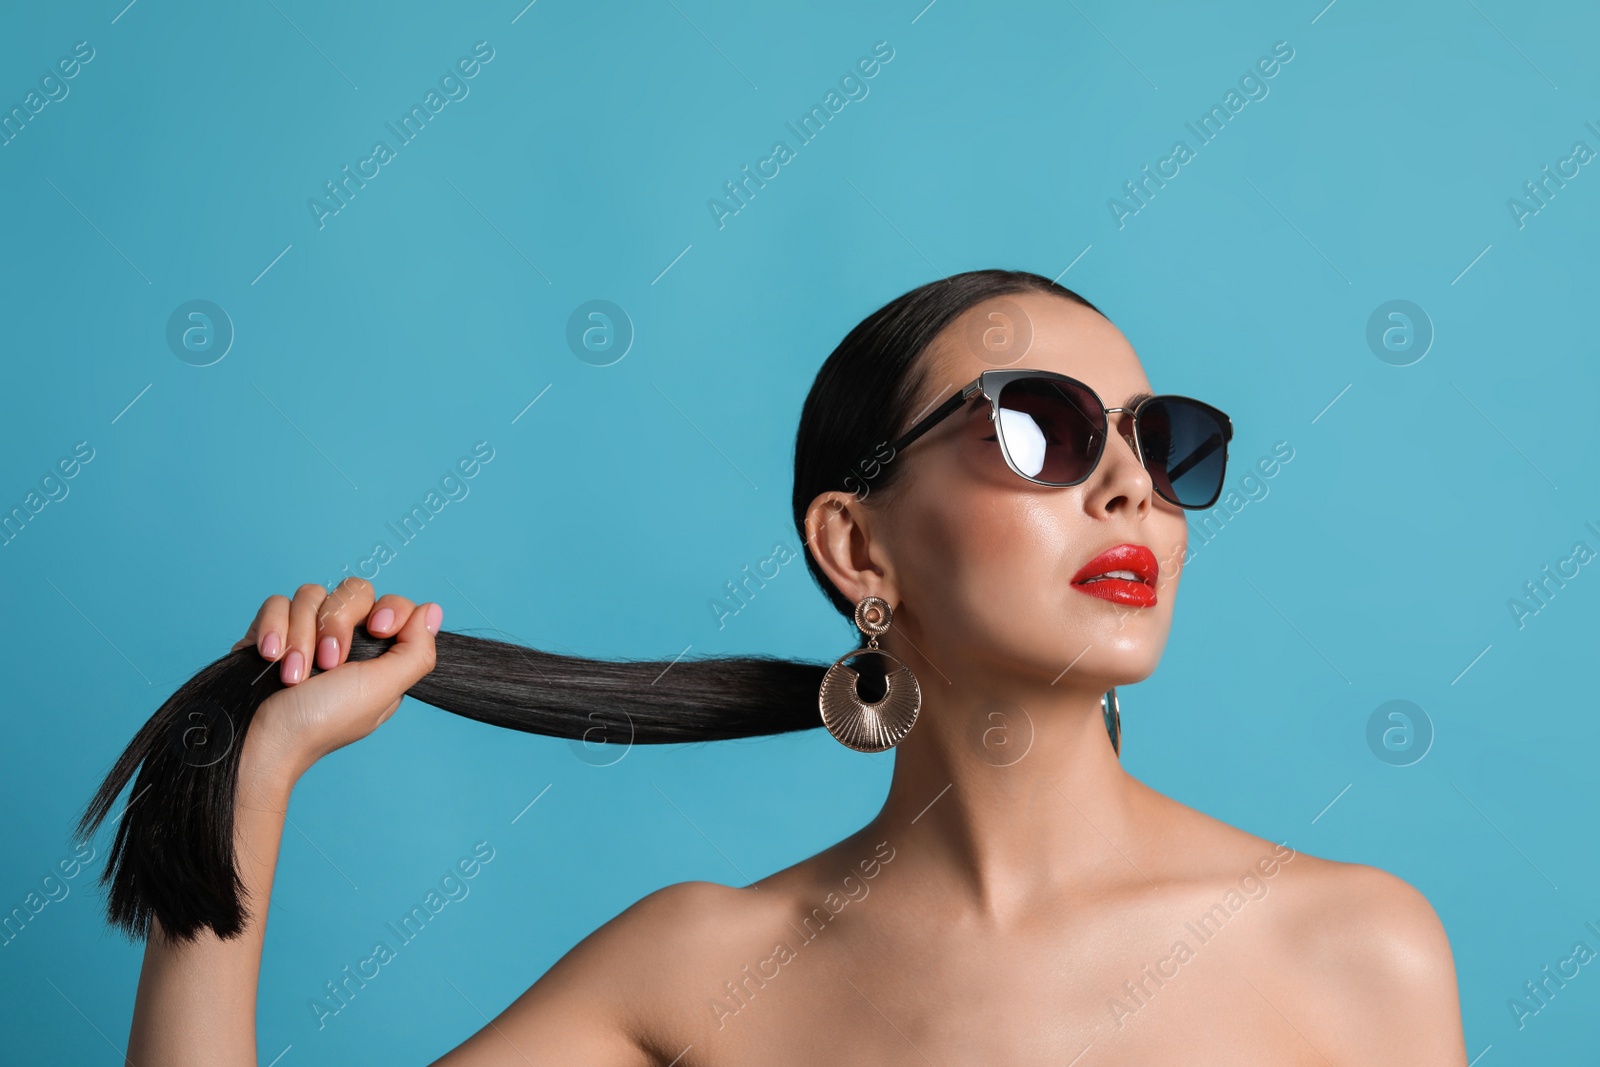 Photo of Attractive woman in fashionable sunglasses touching her hair against light blue background